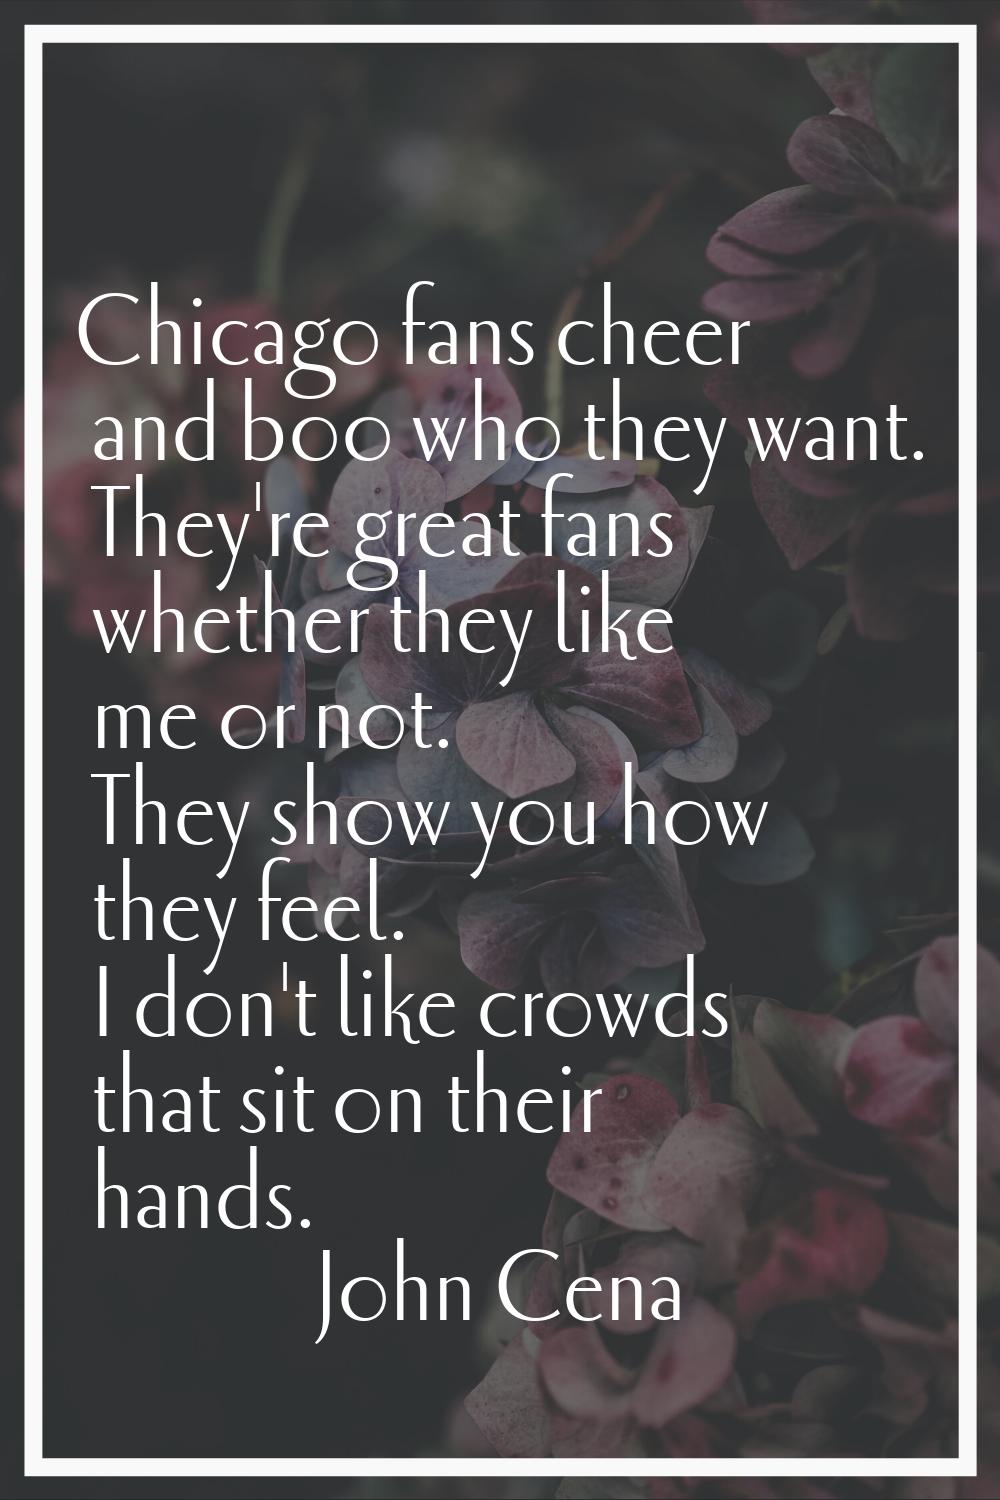 Chicago fans cheer and boo who they want. They're great fans whether they like me or not. They show